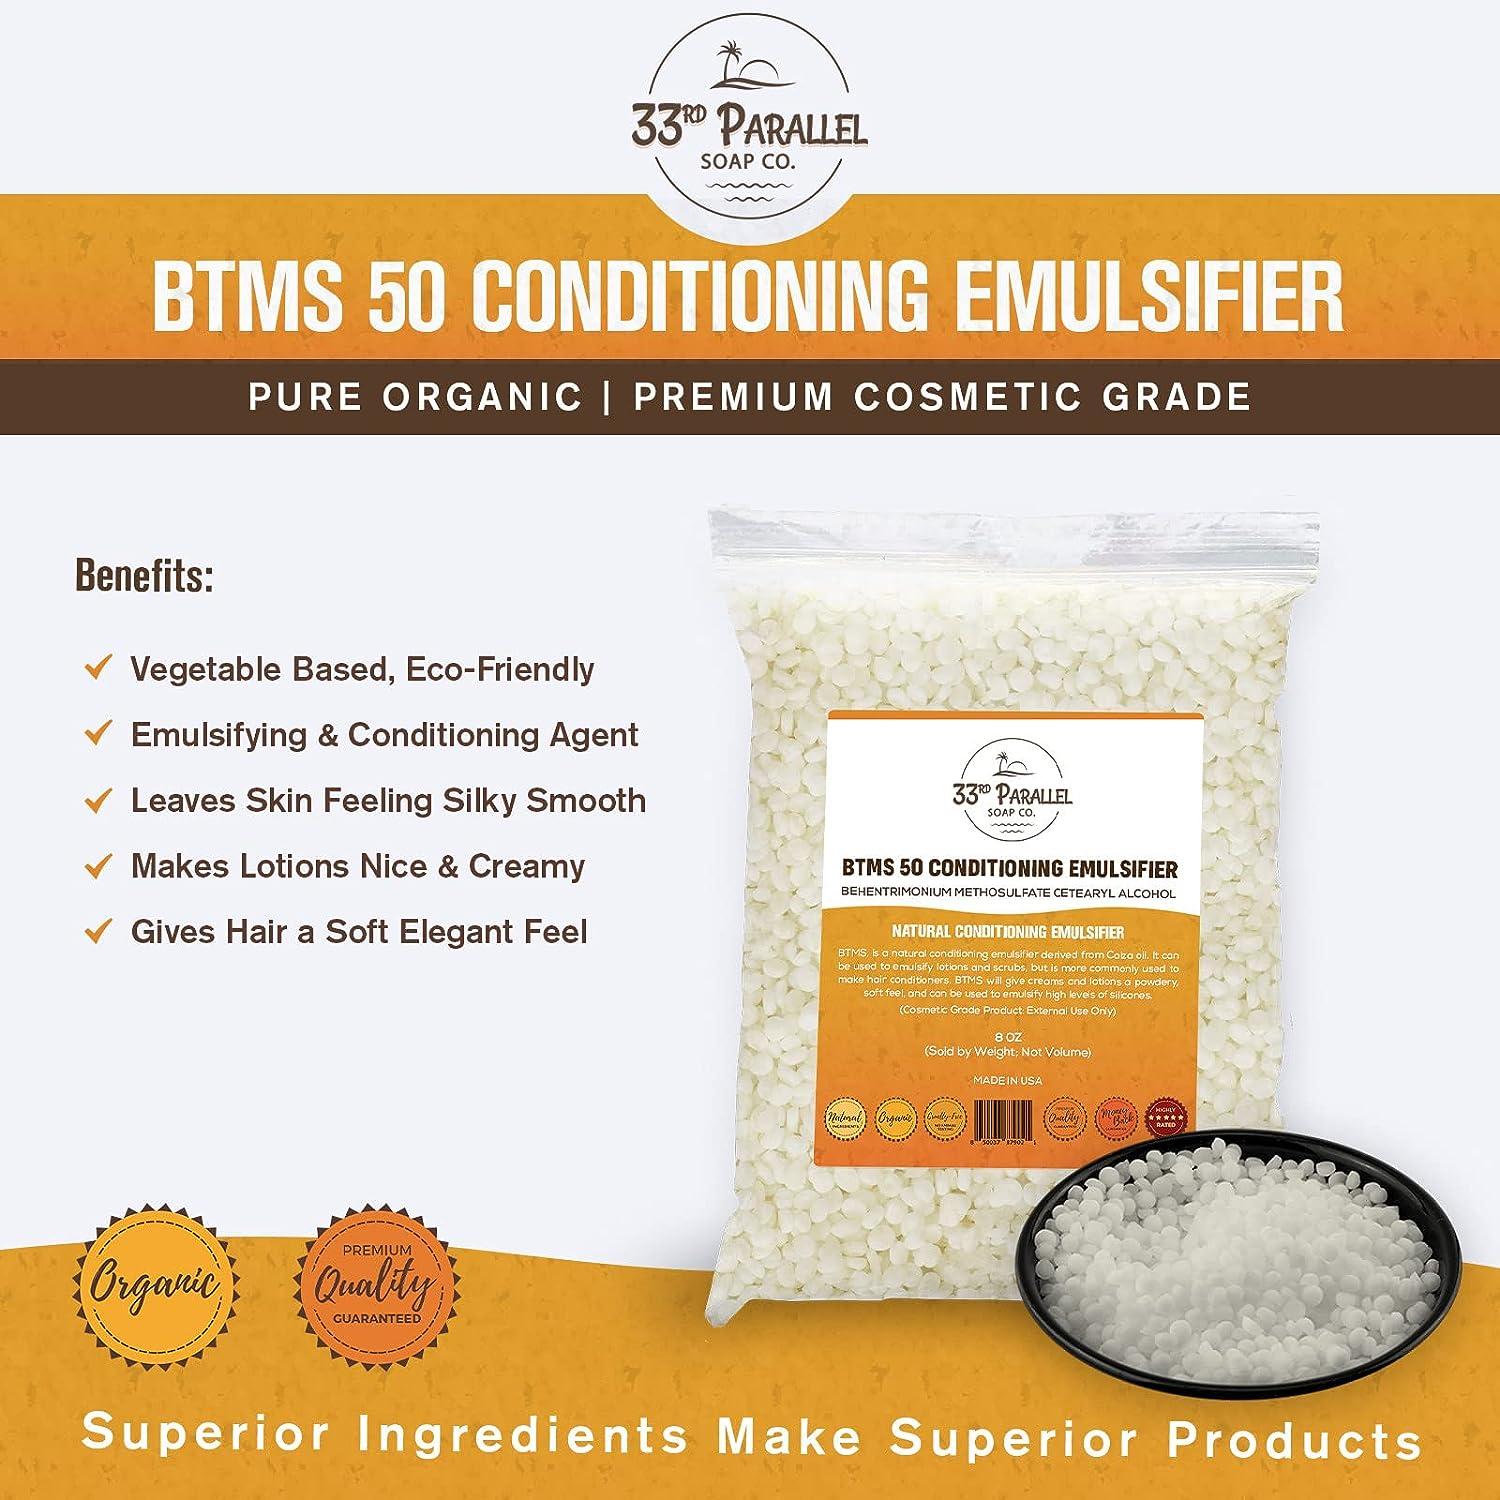 Emulsifying wax - BTMS-25 - Essential Oils and Soap